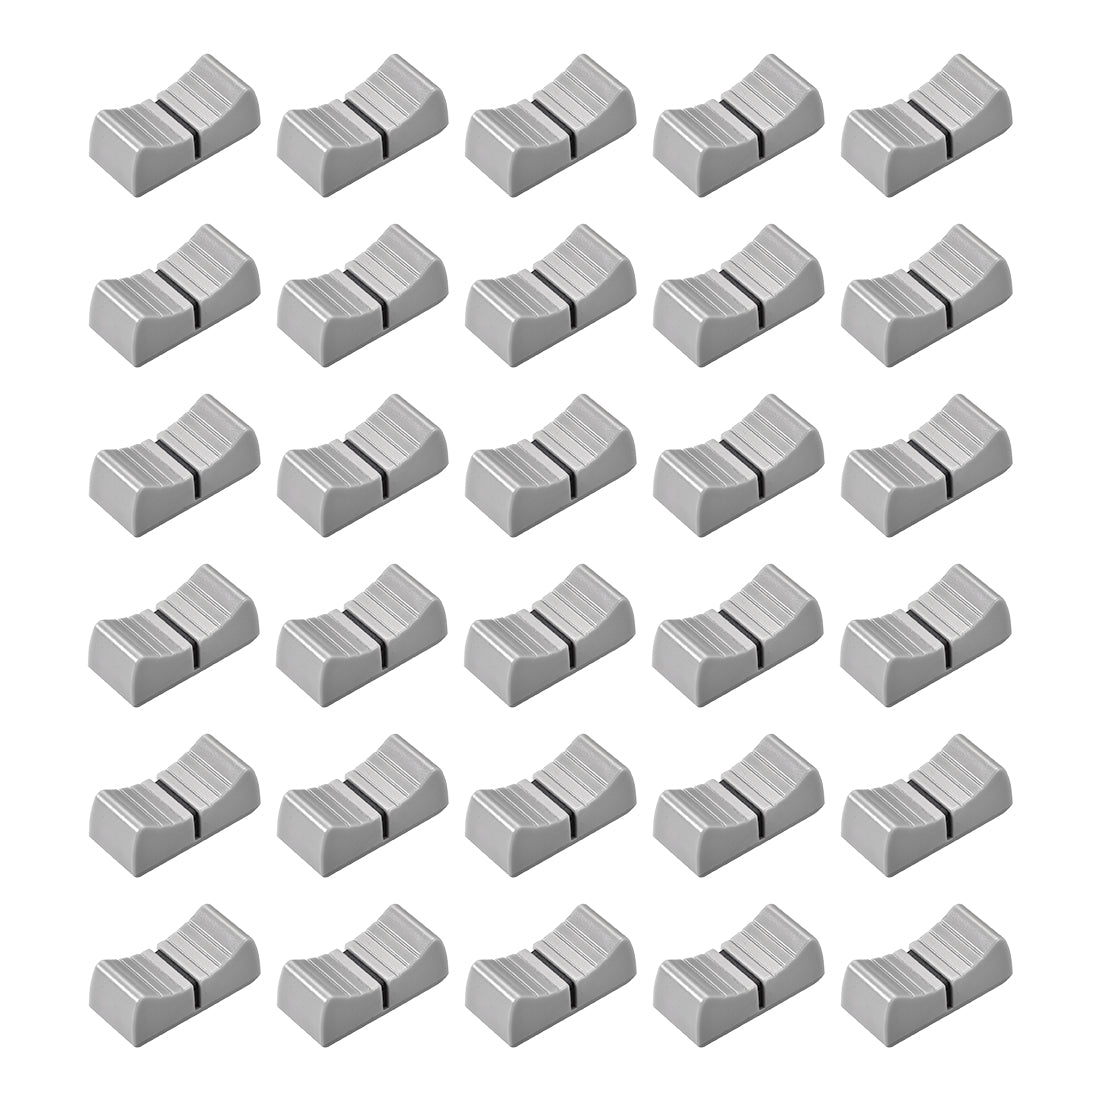 Uxcell Uxcell 24mmx11mmx10mm Console Mixer Slider Fader Knobs Replacement for Potentiometer Gray Knob Black Mark 30pcs